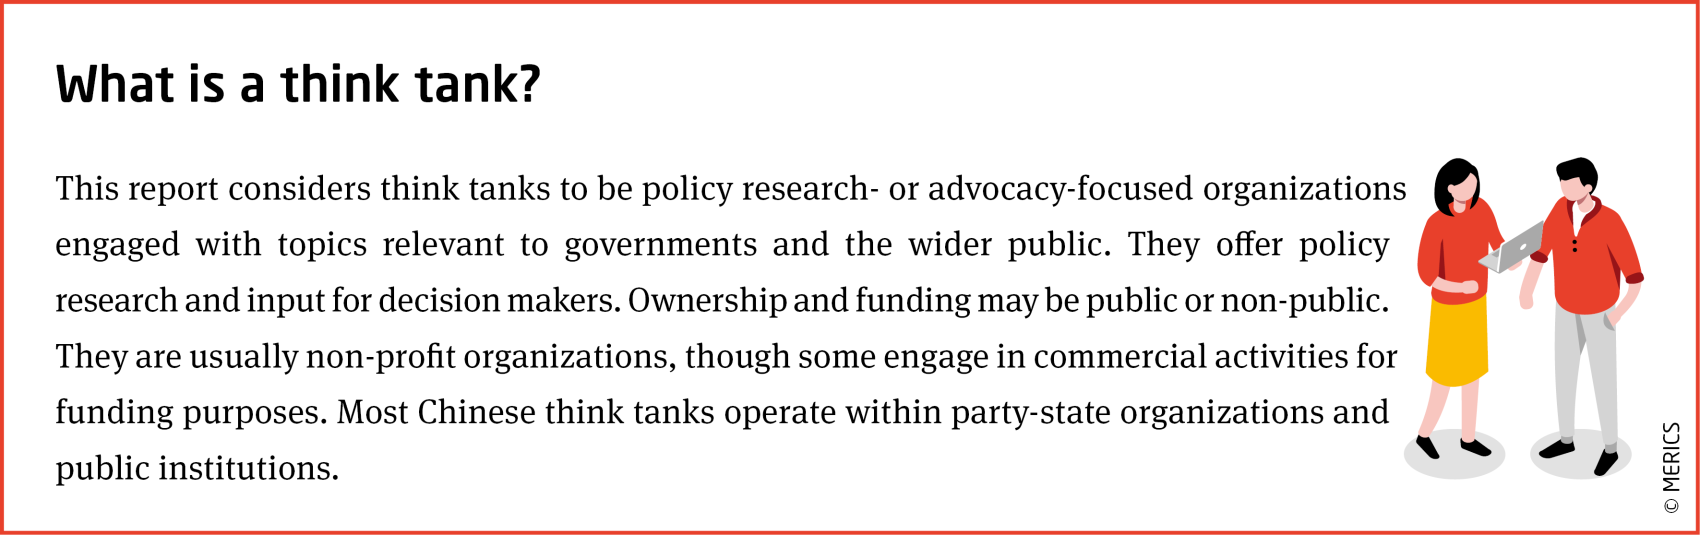 merics-china-think-tanks-what-is-a-think-tank.png